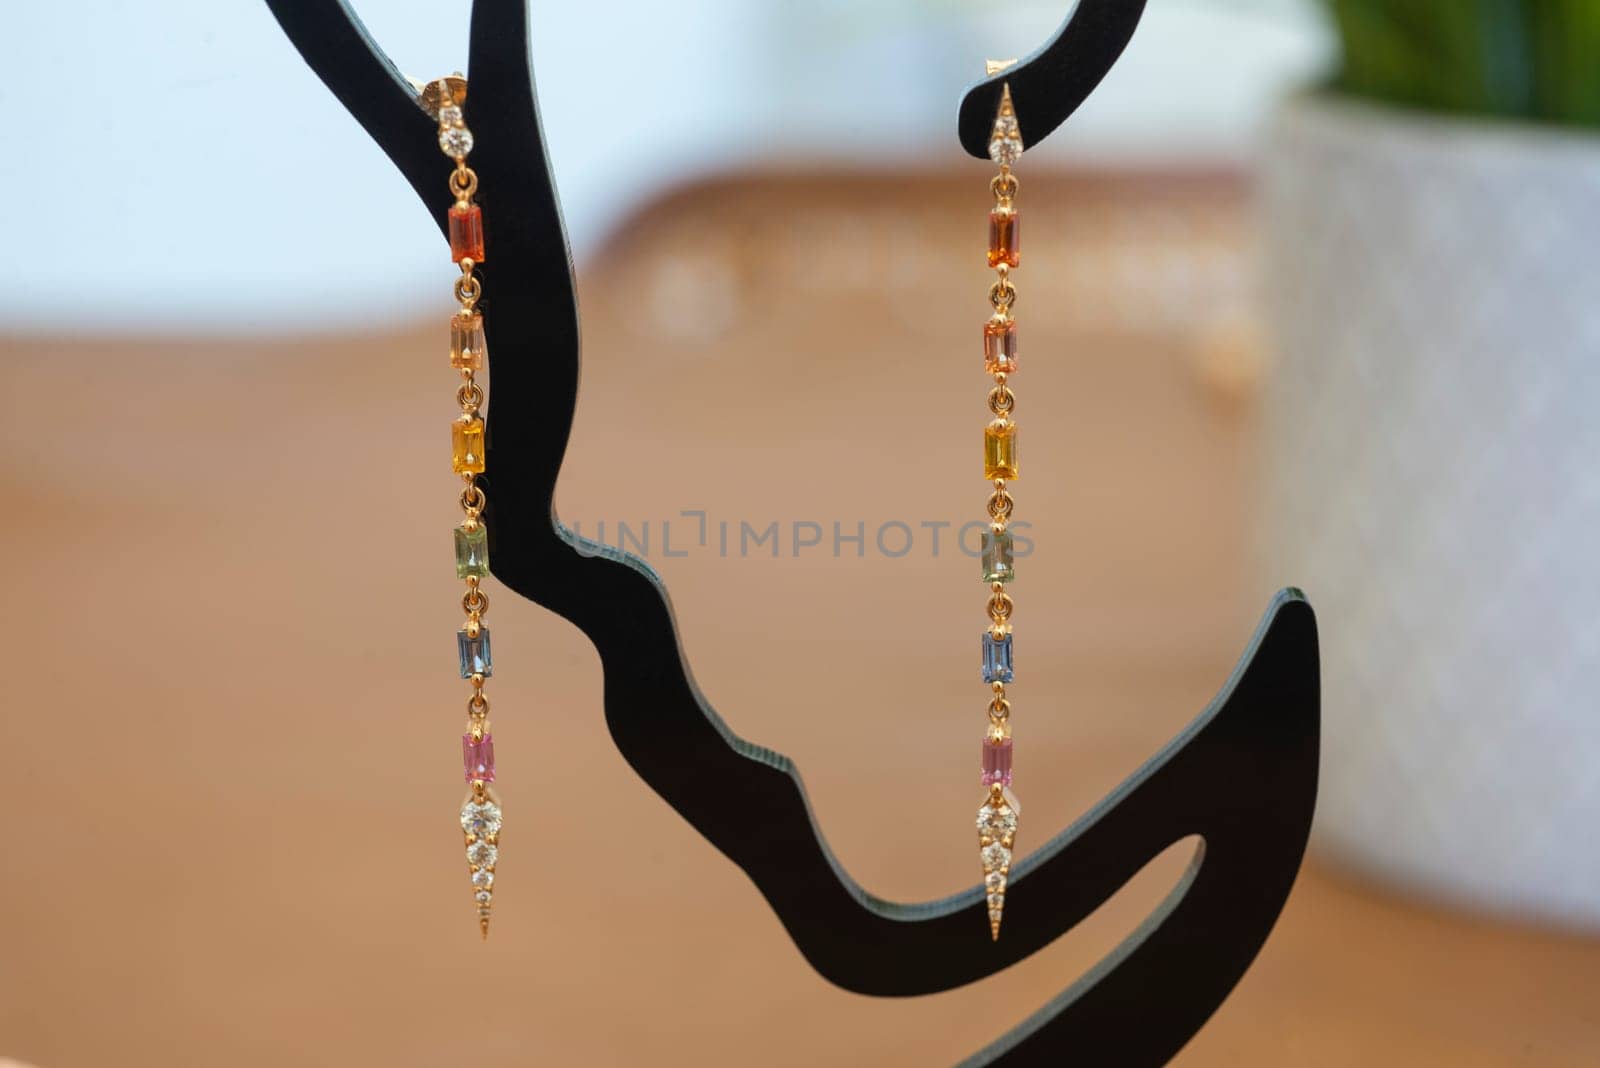 Pair of luxury expensive ladies dangling earrings jewelry hanging on display stand with a selection variety of precious gemstones